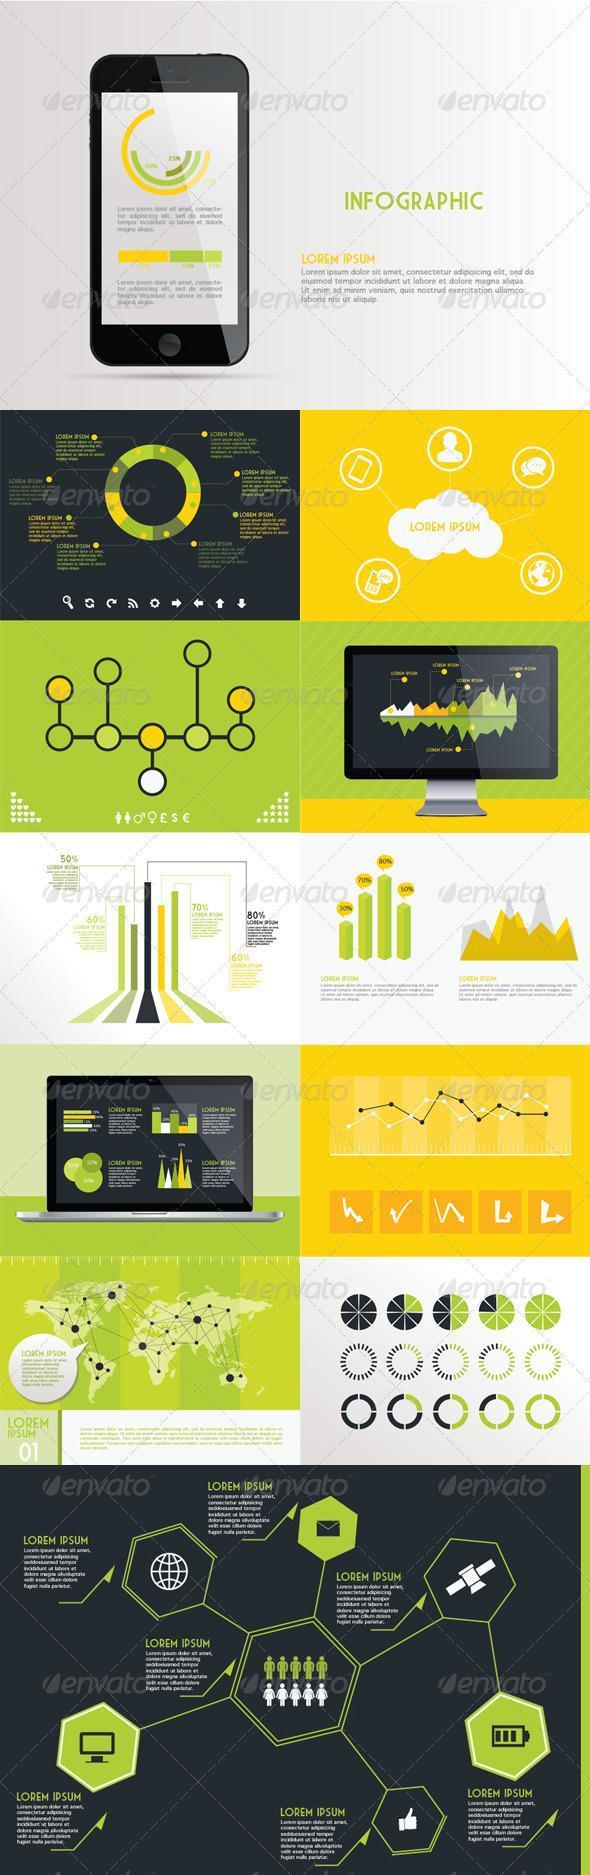 Infographic Vector Template